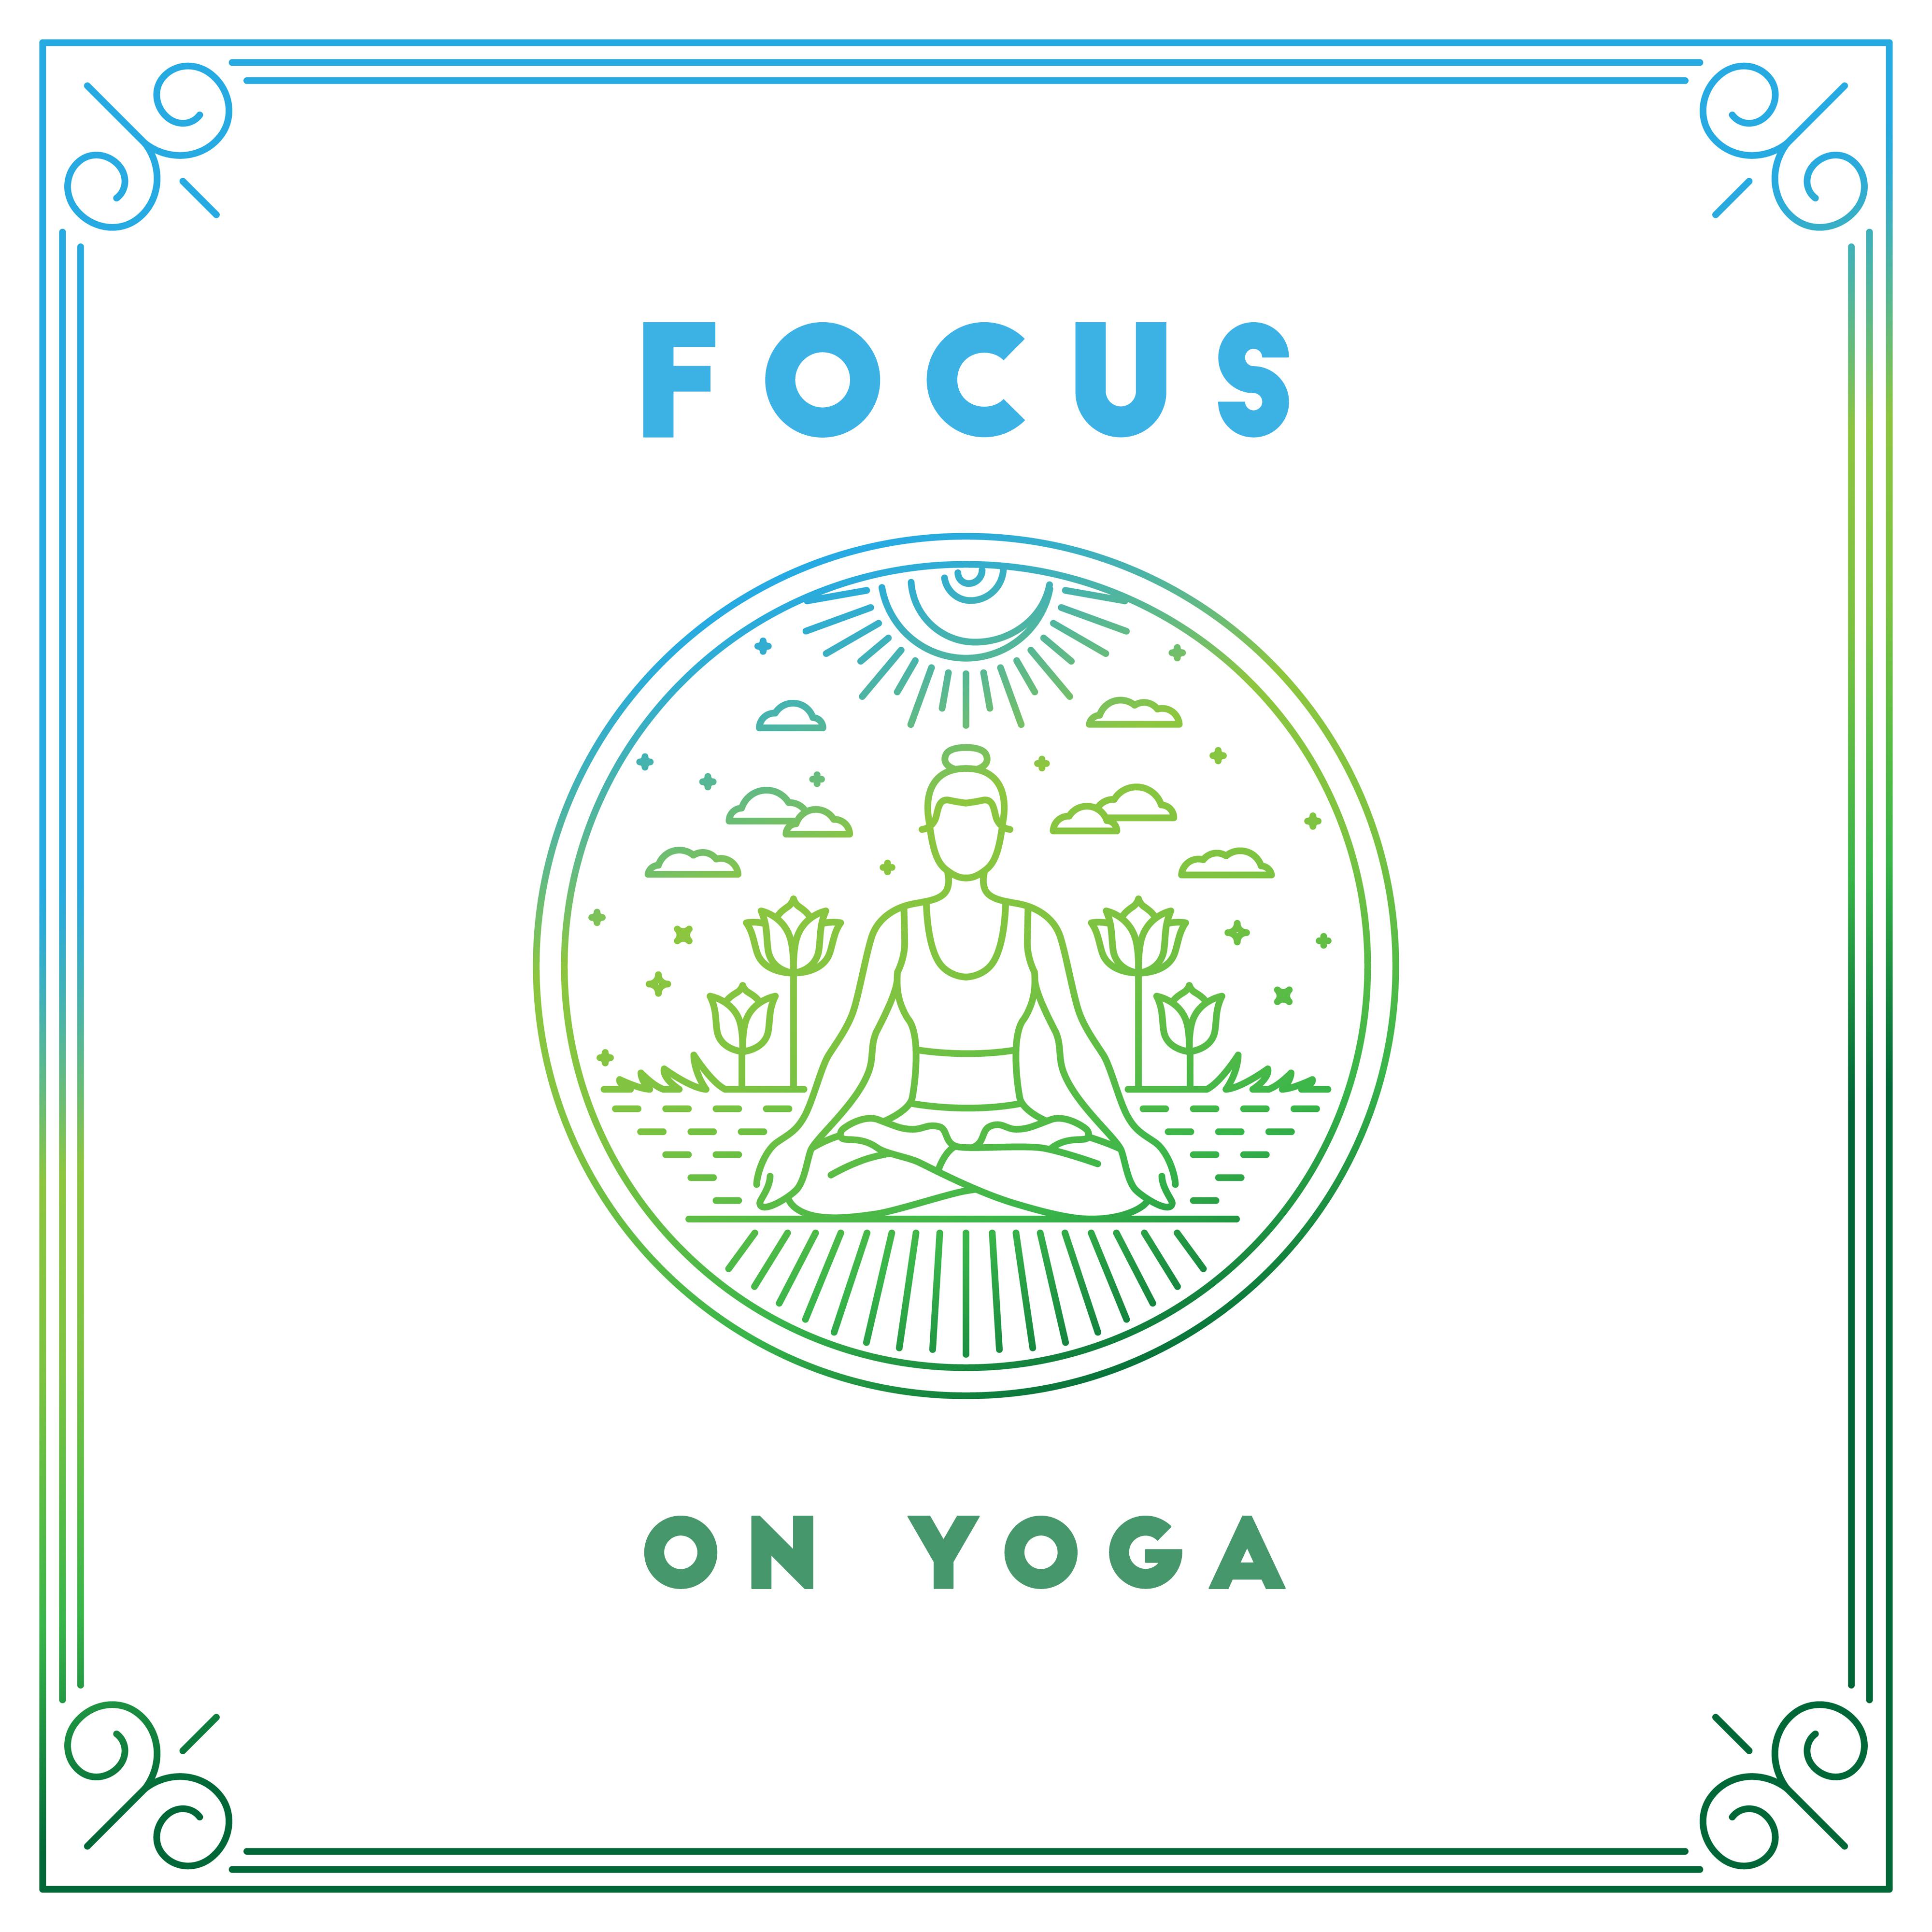 Focus on Yoga: 2019 New Age Deep Music for Meditation & Relaxation, Training New Yoga Poses, Chakra Opening, Healing Body & Soul